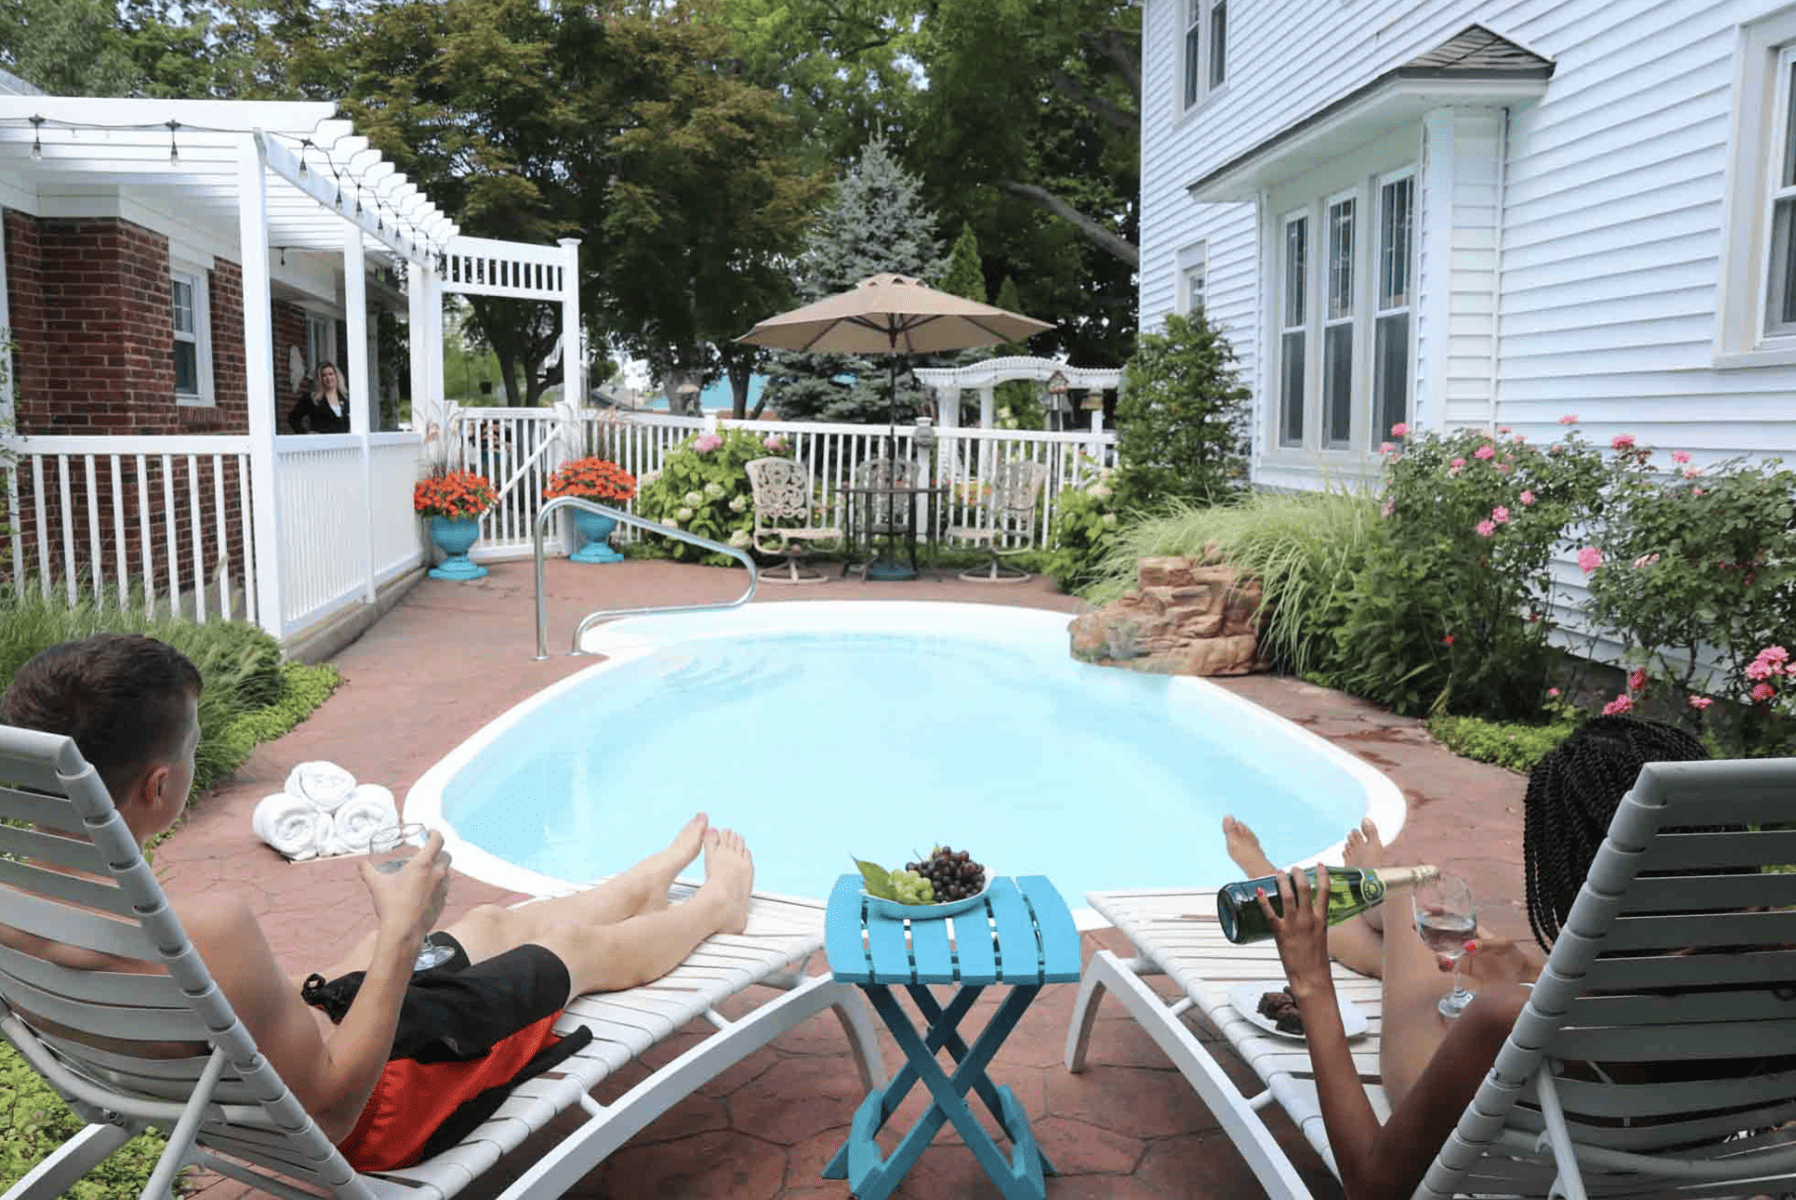 Couple relaxing by an outdoor pool at the PrairieSIde Suites